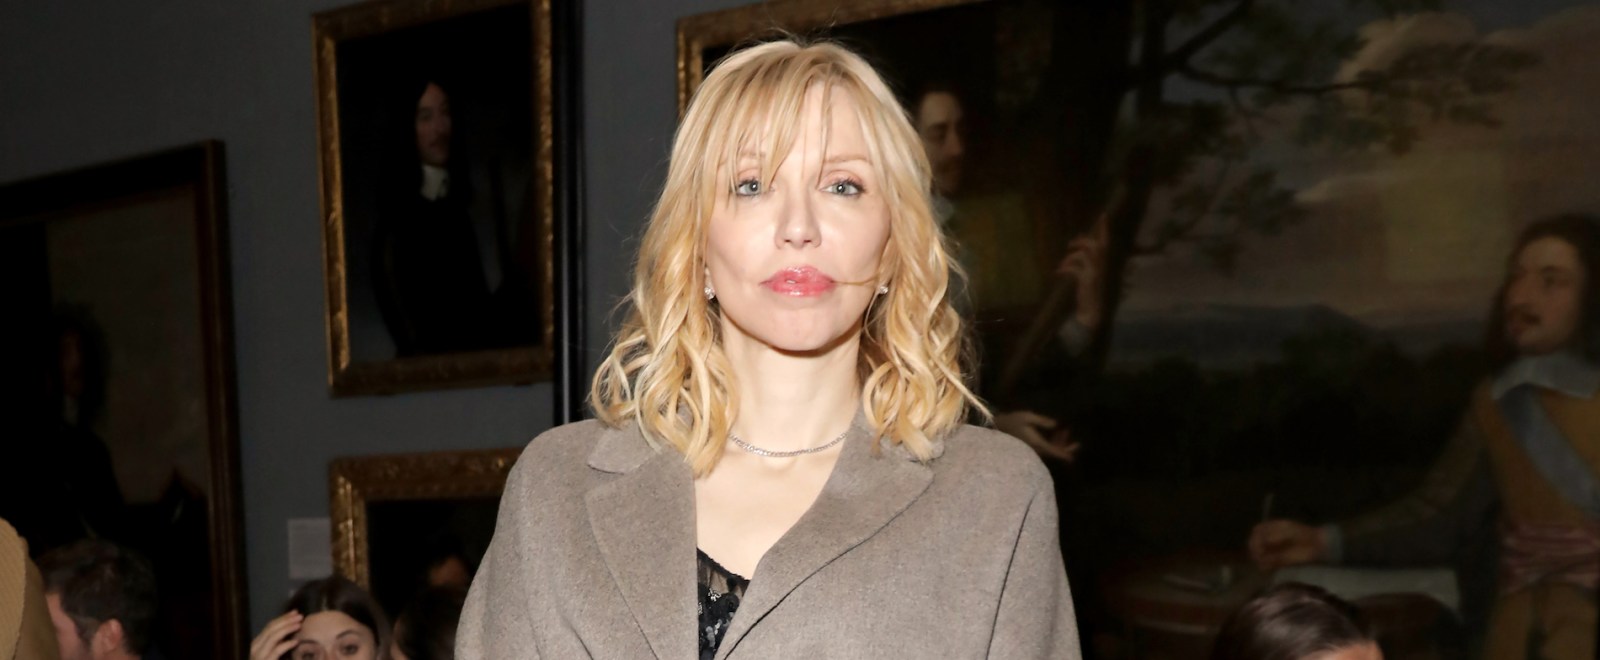 Courtney Love Reveals She Almost Died In 2020